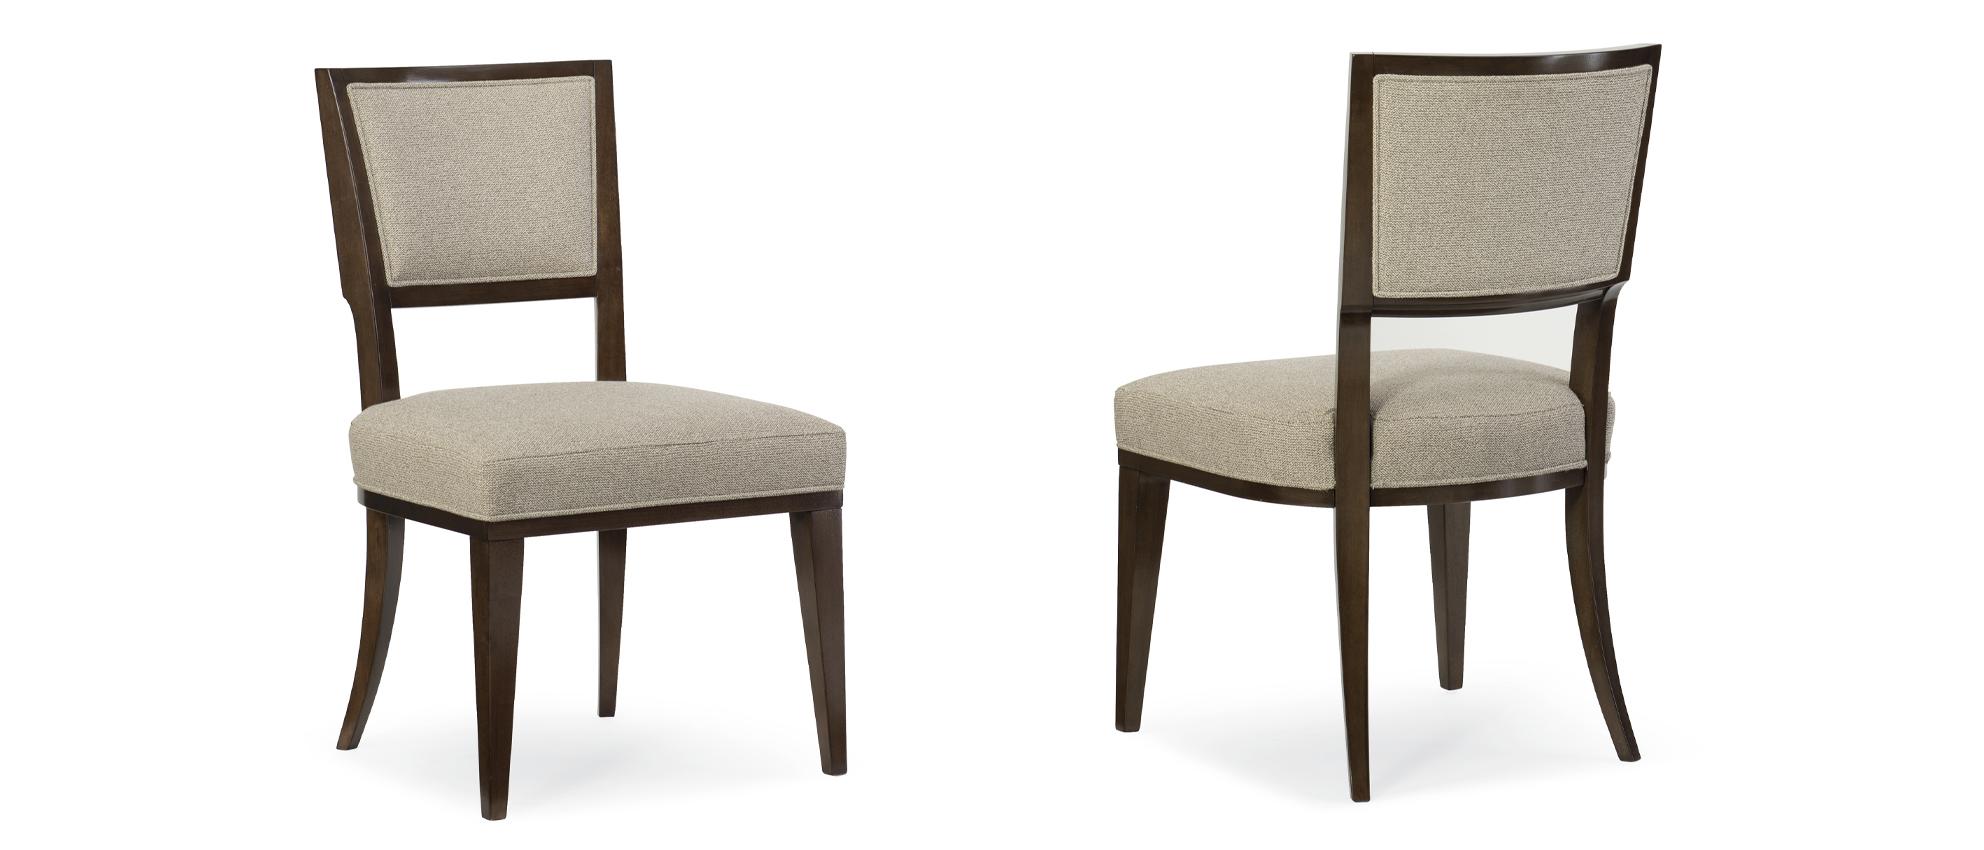 Contemporary Dining Side Chair MODERNE ARM CHAIR M022-417-282-Set-2 in Brown, Beige Fabric